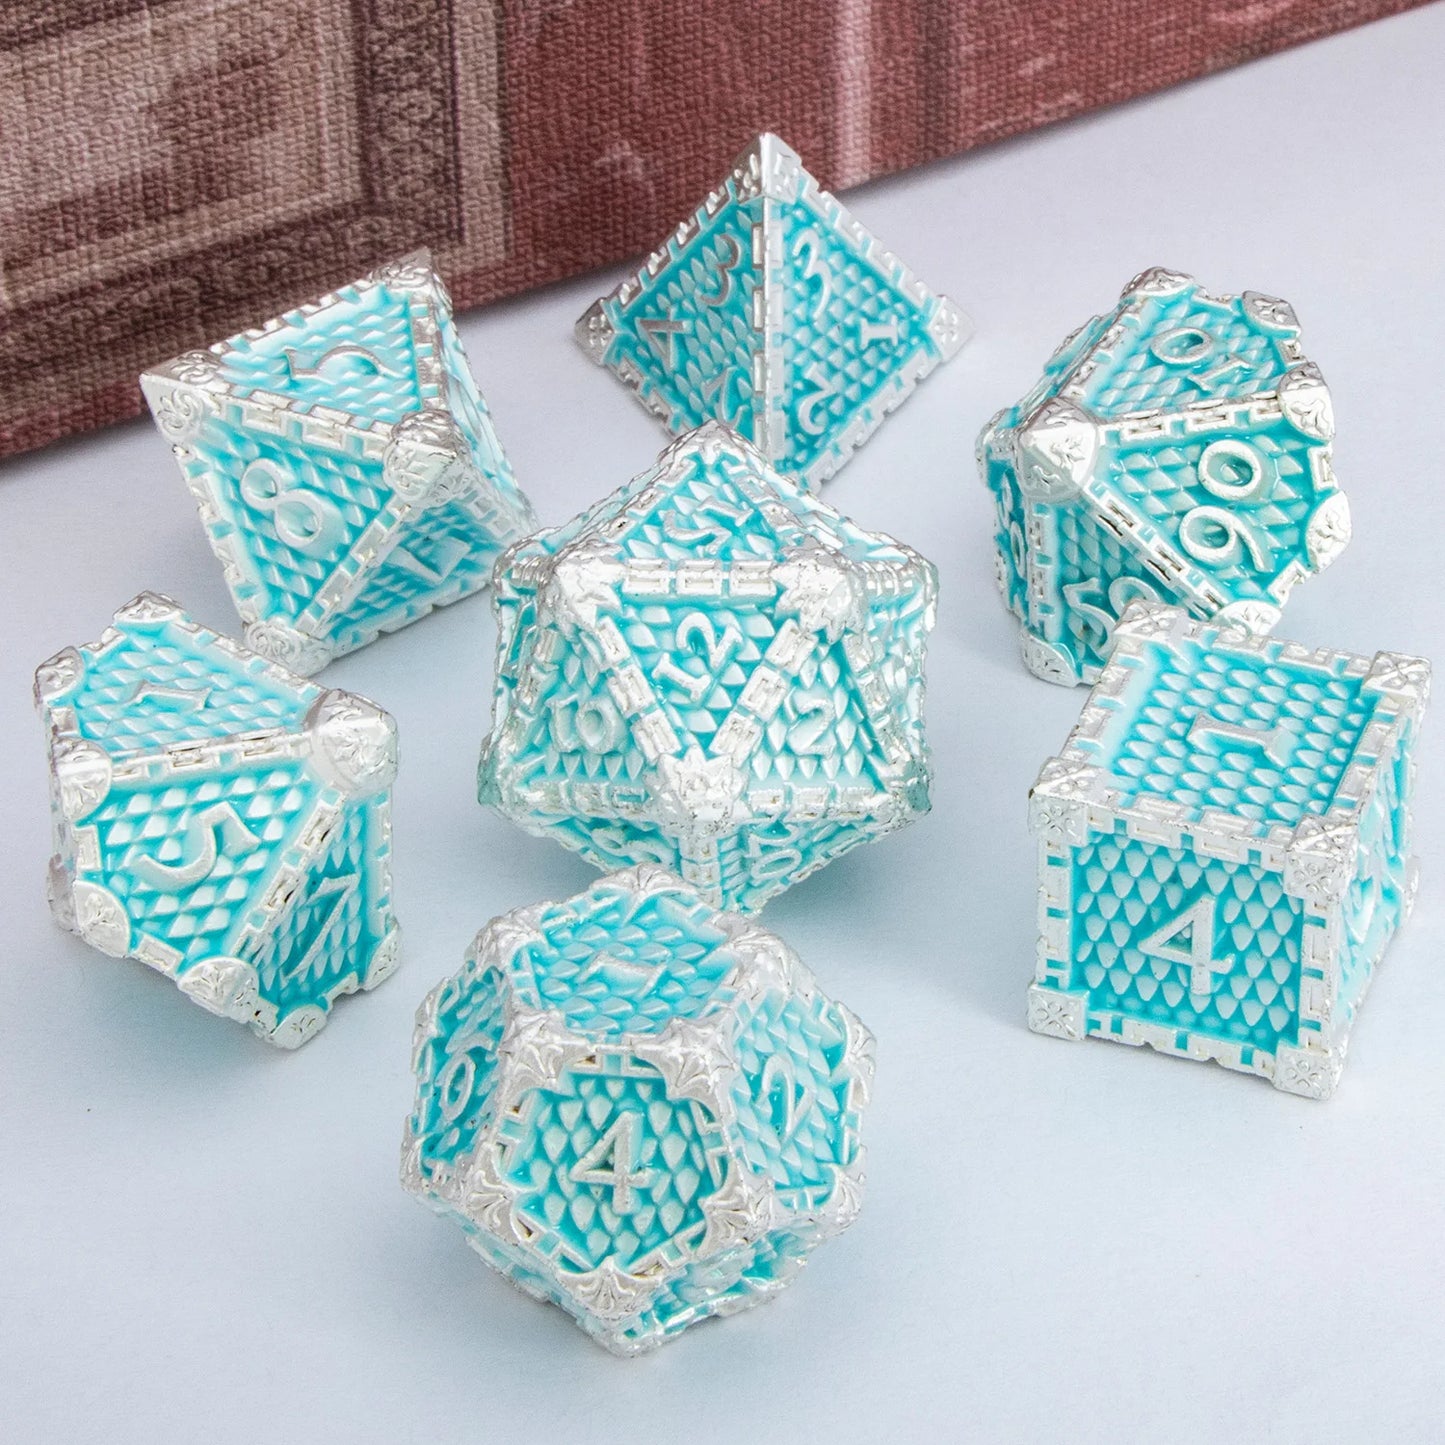 DND Metal Dice Set Dragon Scale D&D Dice Dungeon and Dragon Role Playing Games Black Green Polyhedral Dice RPG D and D Dice Silver Blue